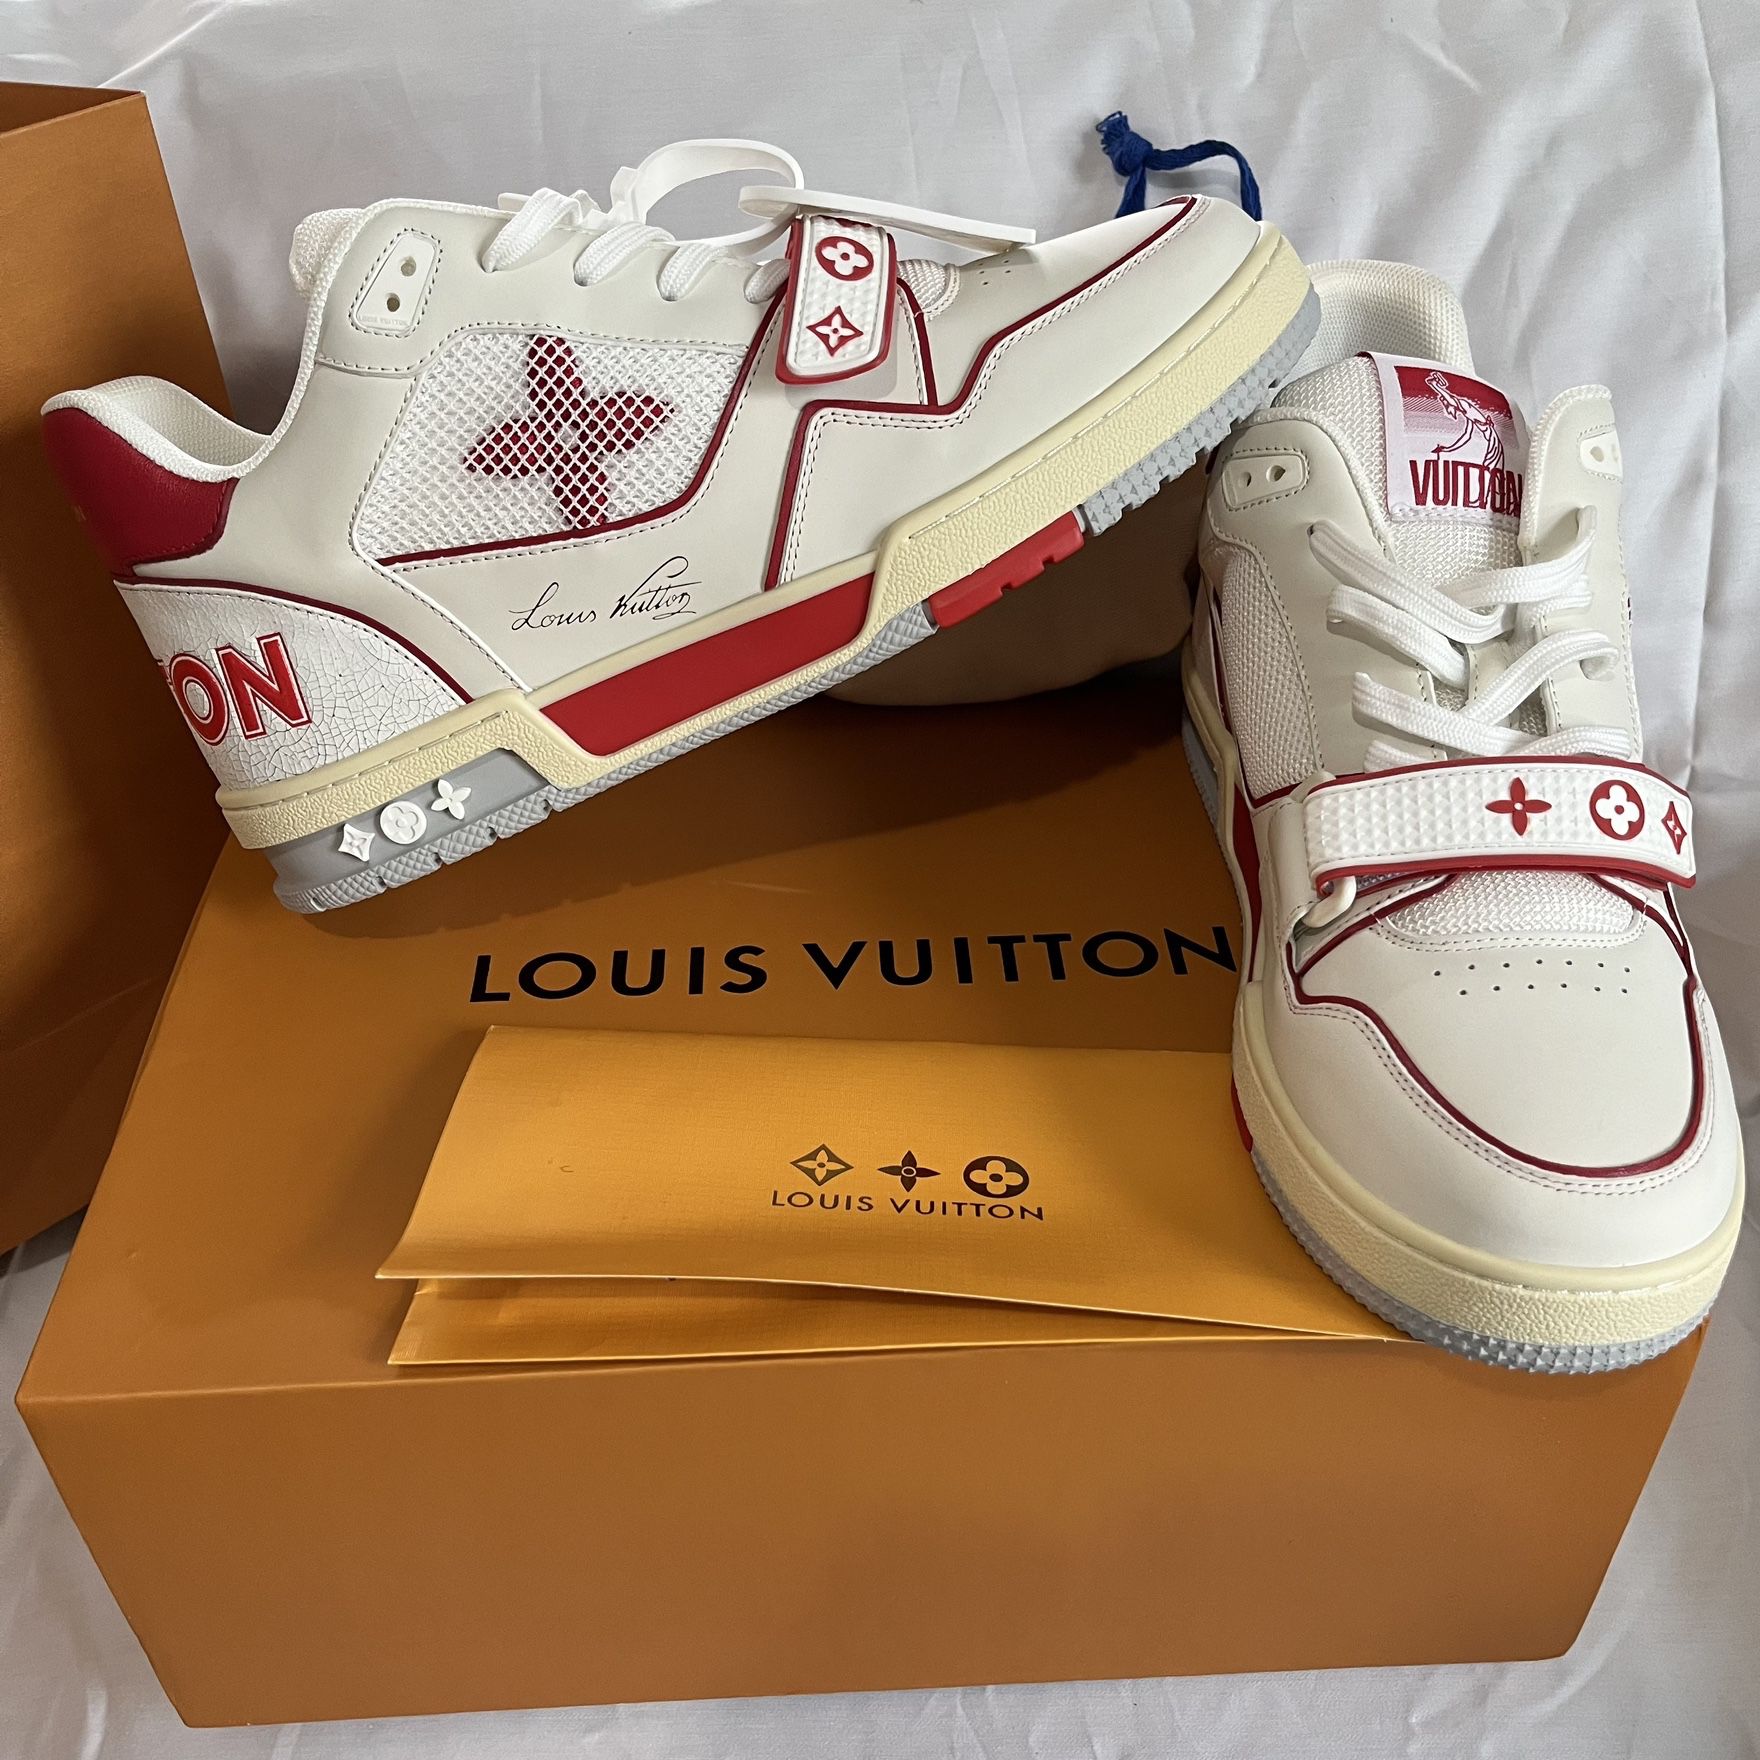 Louis Vuitton LV Trainer Sneaker Red. Size 10.5